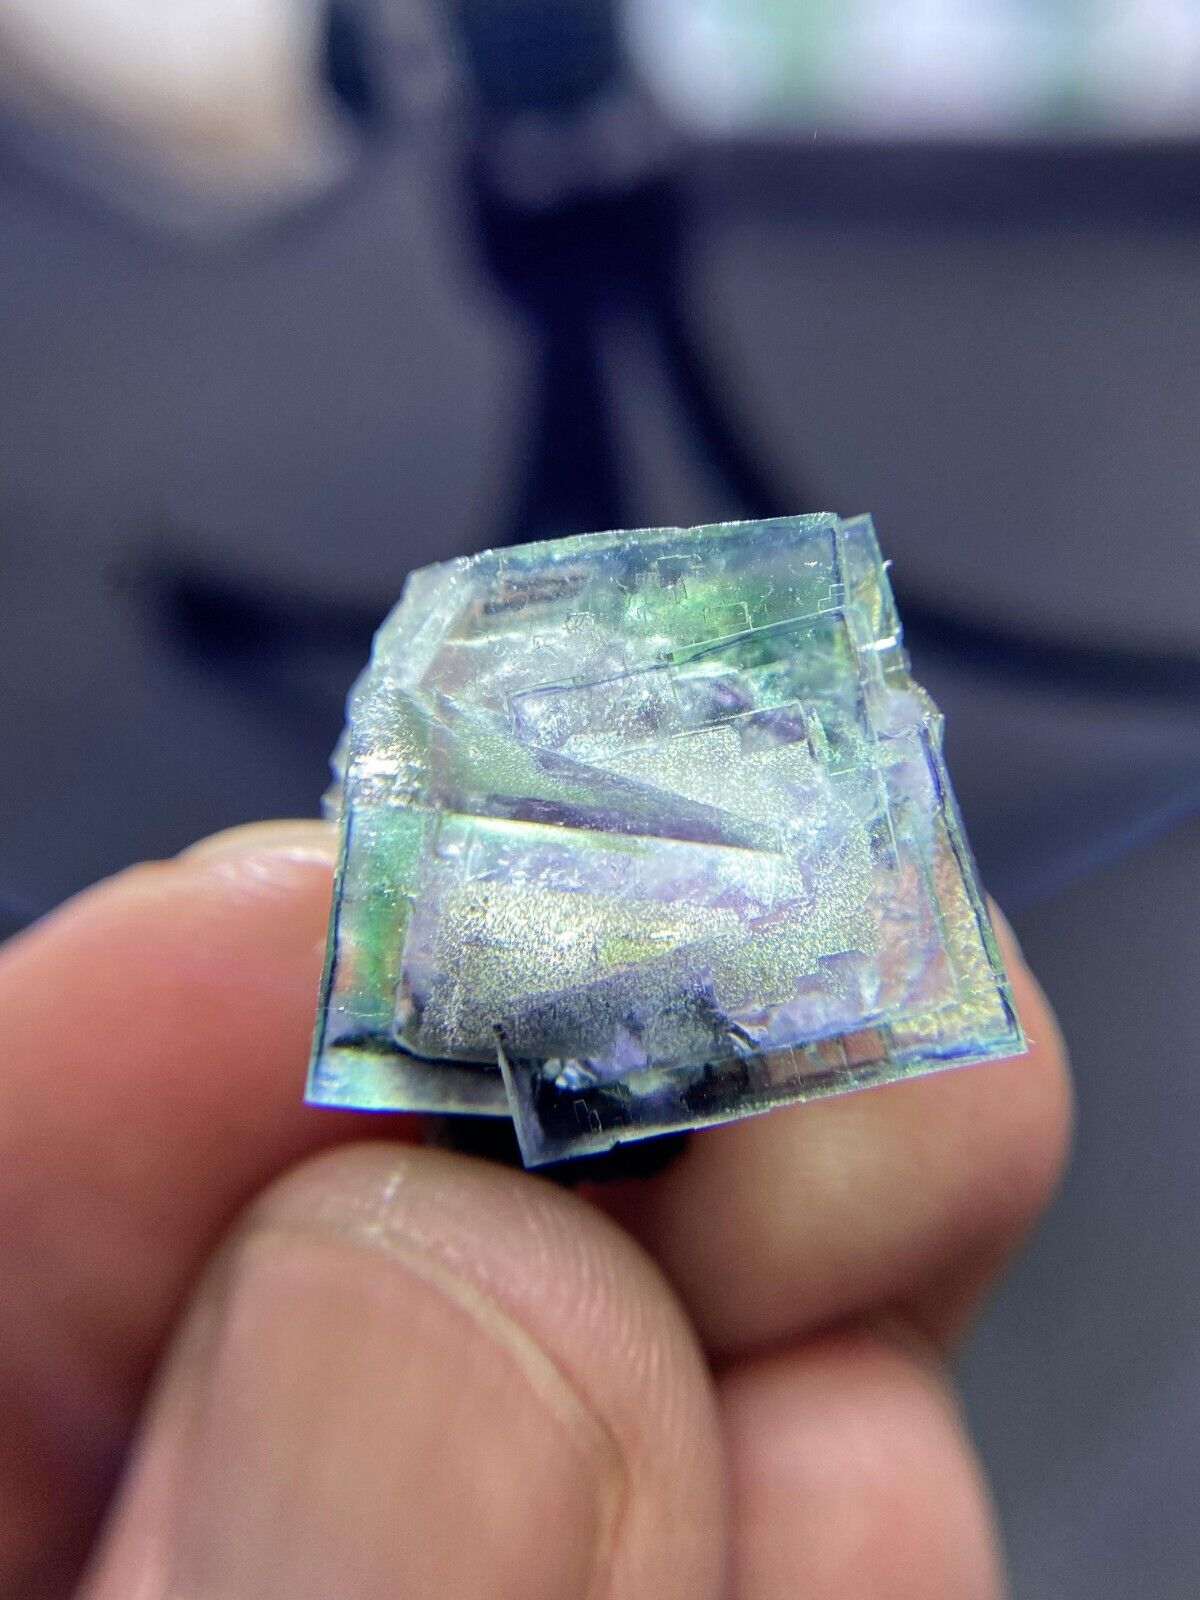 Magnificent three color transparent cubic fluorite crystal, Yao Gang Xian